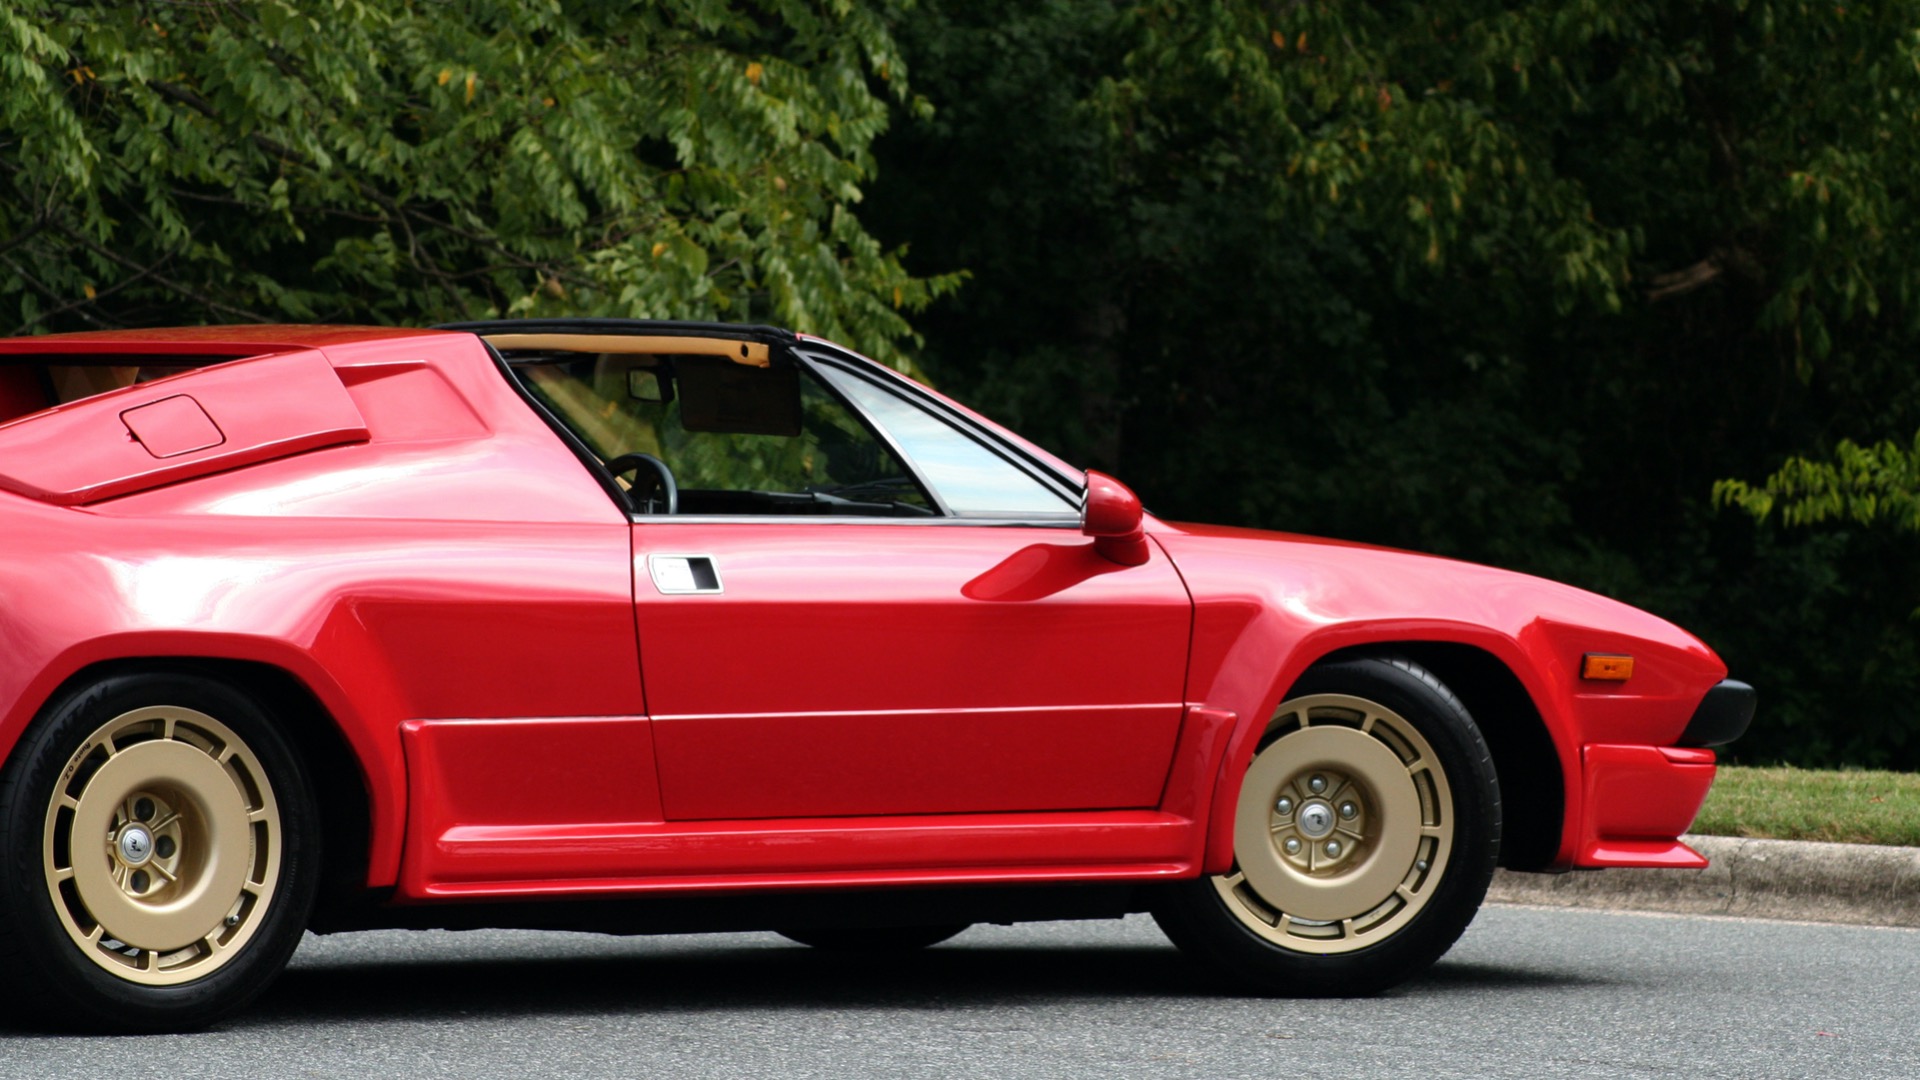 Used 1988 Lamborghini JALPA 3.5 / 5-SPD MANUAL / LOW MILES / EXCELLENT CONDITION for sale Sold at Formula Imports in Charlotte NC 28227 11